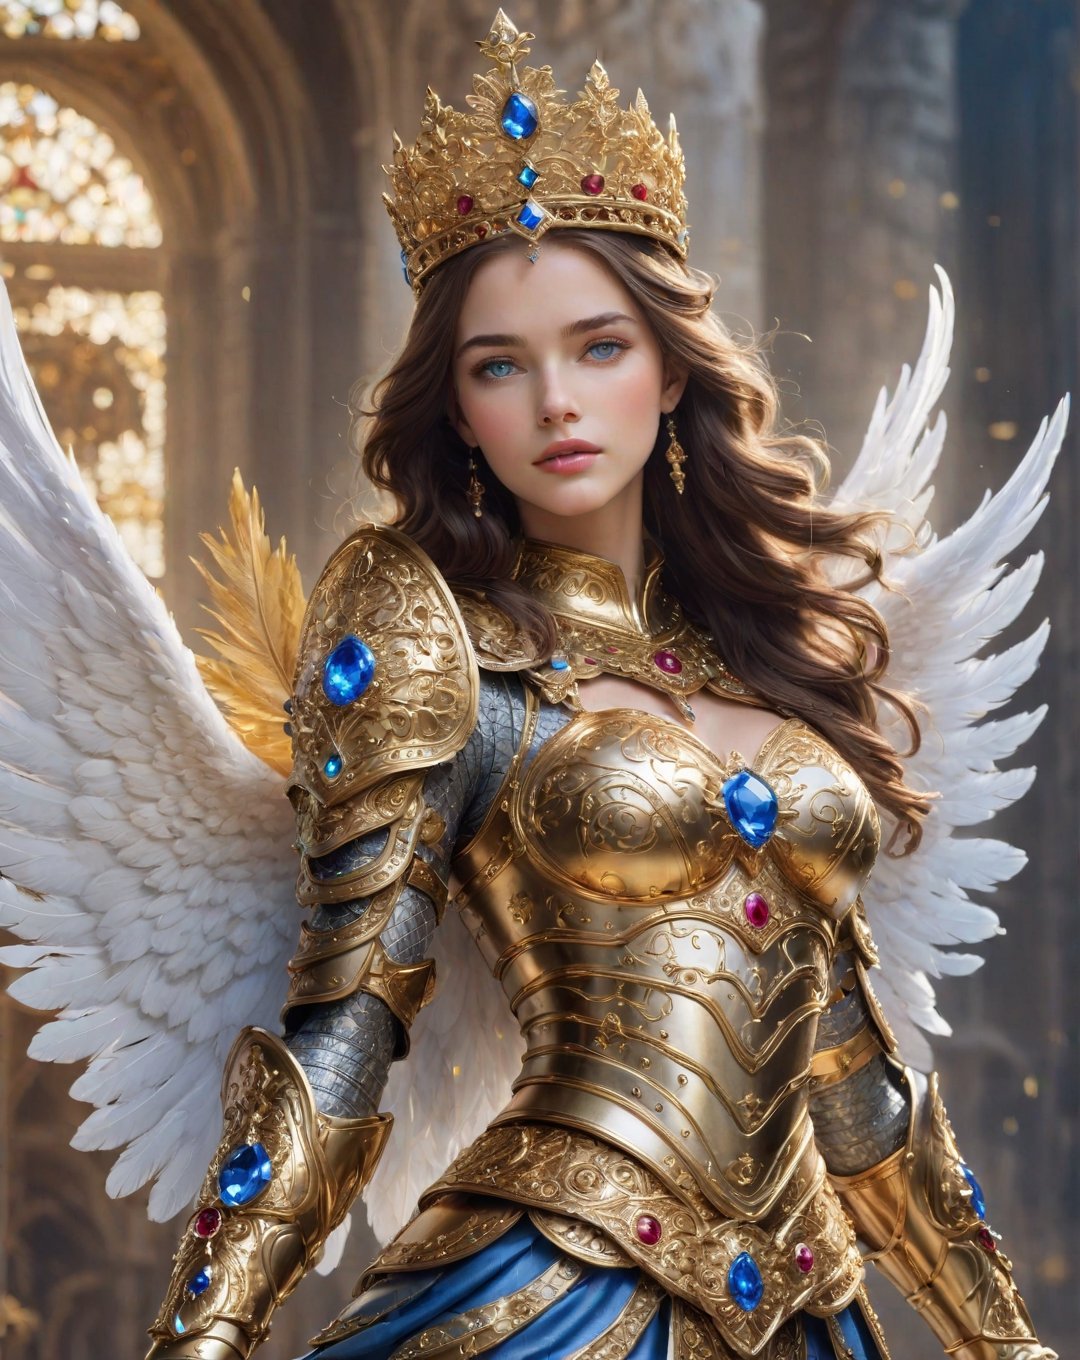 ((Masterpiece), (best quality), (highly detailed)), A stunningly beautiful angel with 2 powerful wings stands tall in a celestial realm, adorned in a armour of gold, encrusted with diamonds, rubies, emeralds and saphires. The armour covers her entire torso. She has an incredibly beautiful face.  She is holding an ornate golden staff that is capped with a huge diamond in her right hand, the angel exudes a sense of strength and divine presence. The intricate details of the angel's golden trim and the delicate feathers of its wings are meticulously rendered, highlighting the beauty and grandeur of this heavenly being, She is breathtakingly beautiful. She has long, flowing dark brown hair and blue eyes and she wears an ornate golden crown adorned with diamonds and precious stones ,LinkGirl,cyborg style,FilmGirl,1 girl,blurry_light_background,flower4rmor,Flower,medieval armor,photo r3al